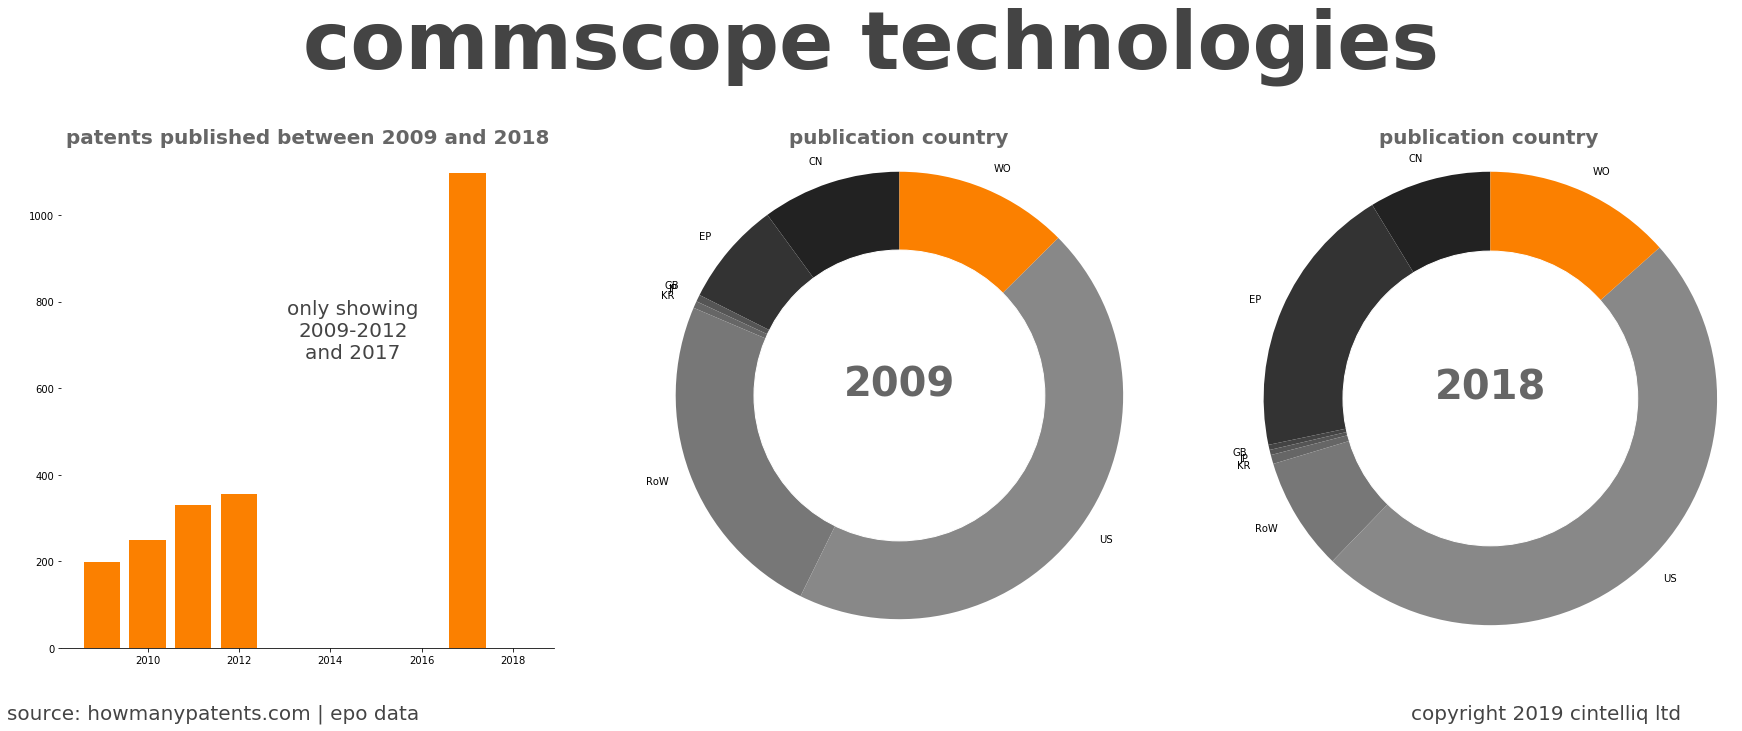 summary of patents for Commscope Technologies